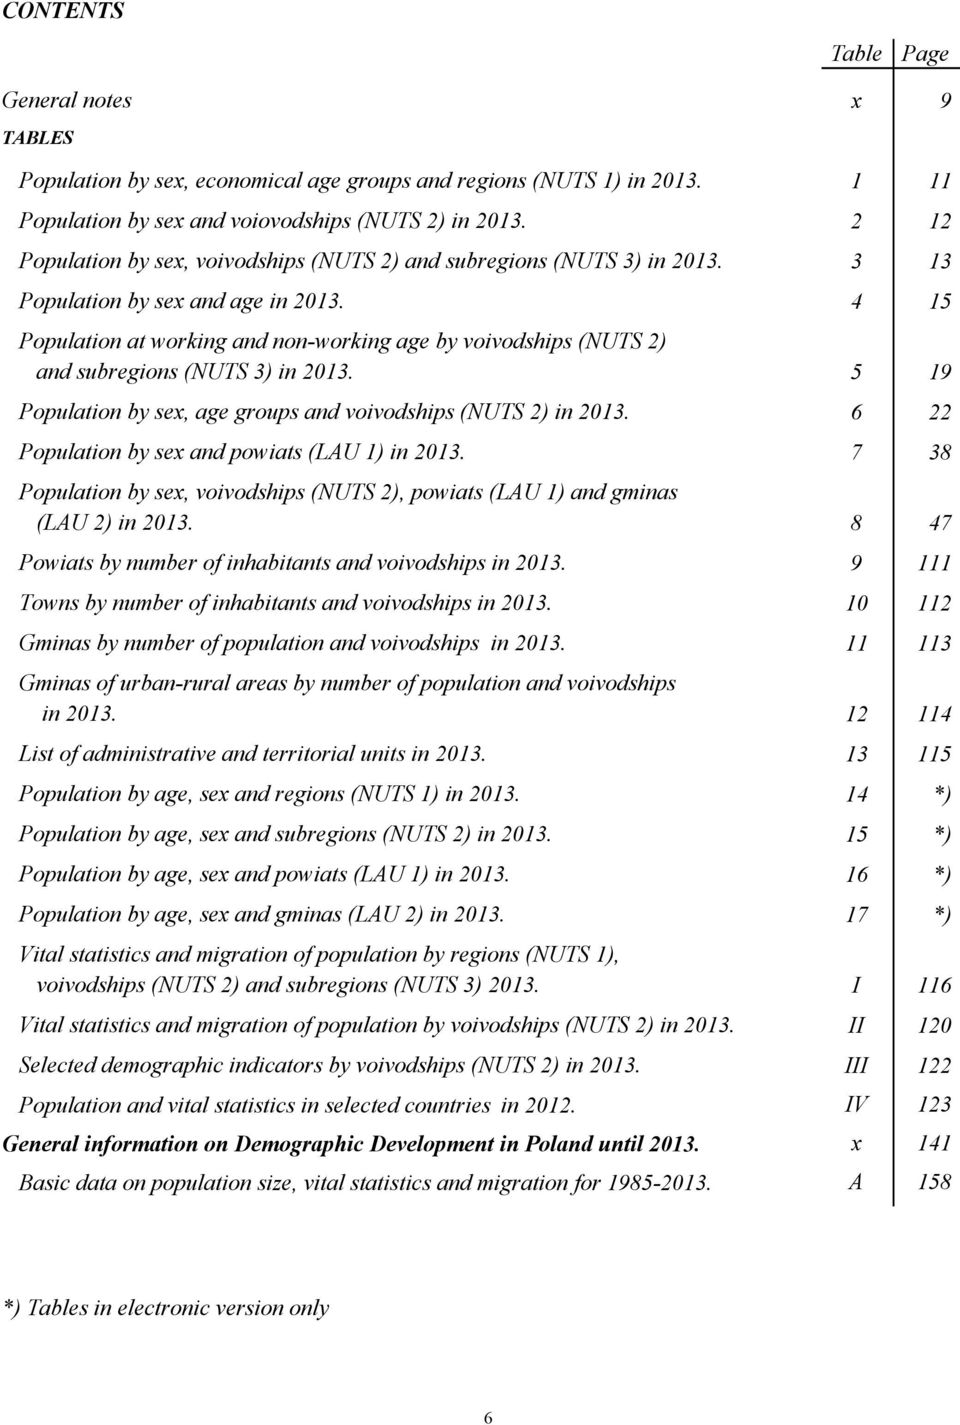 4 15 Population at working and non-working age by voivodships (NUTS 2) and subregions (NUTS 3) in 2013. 5 19 Population by sex, age groups and voivodships (NUTS 2) in 2013.